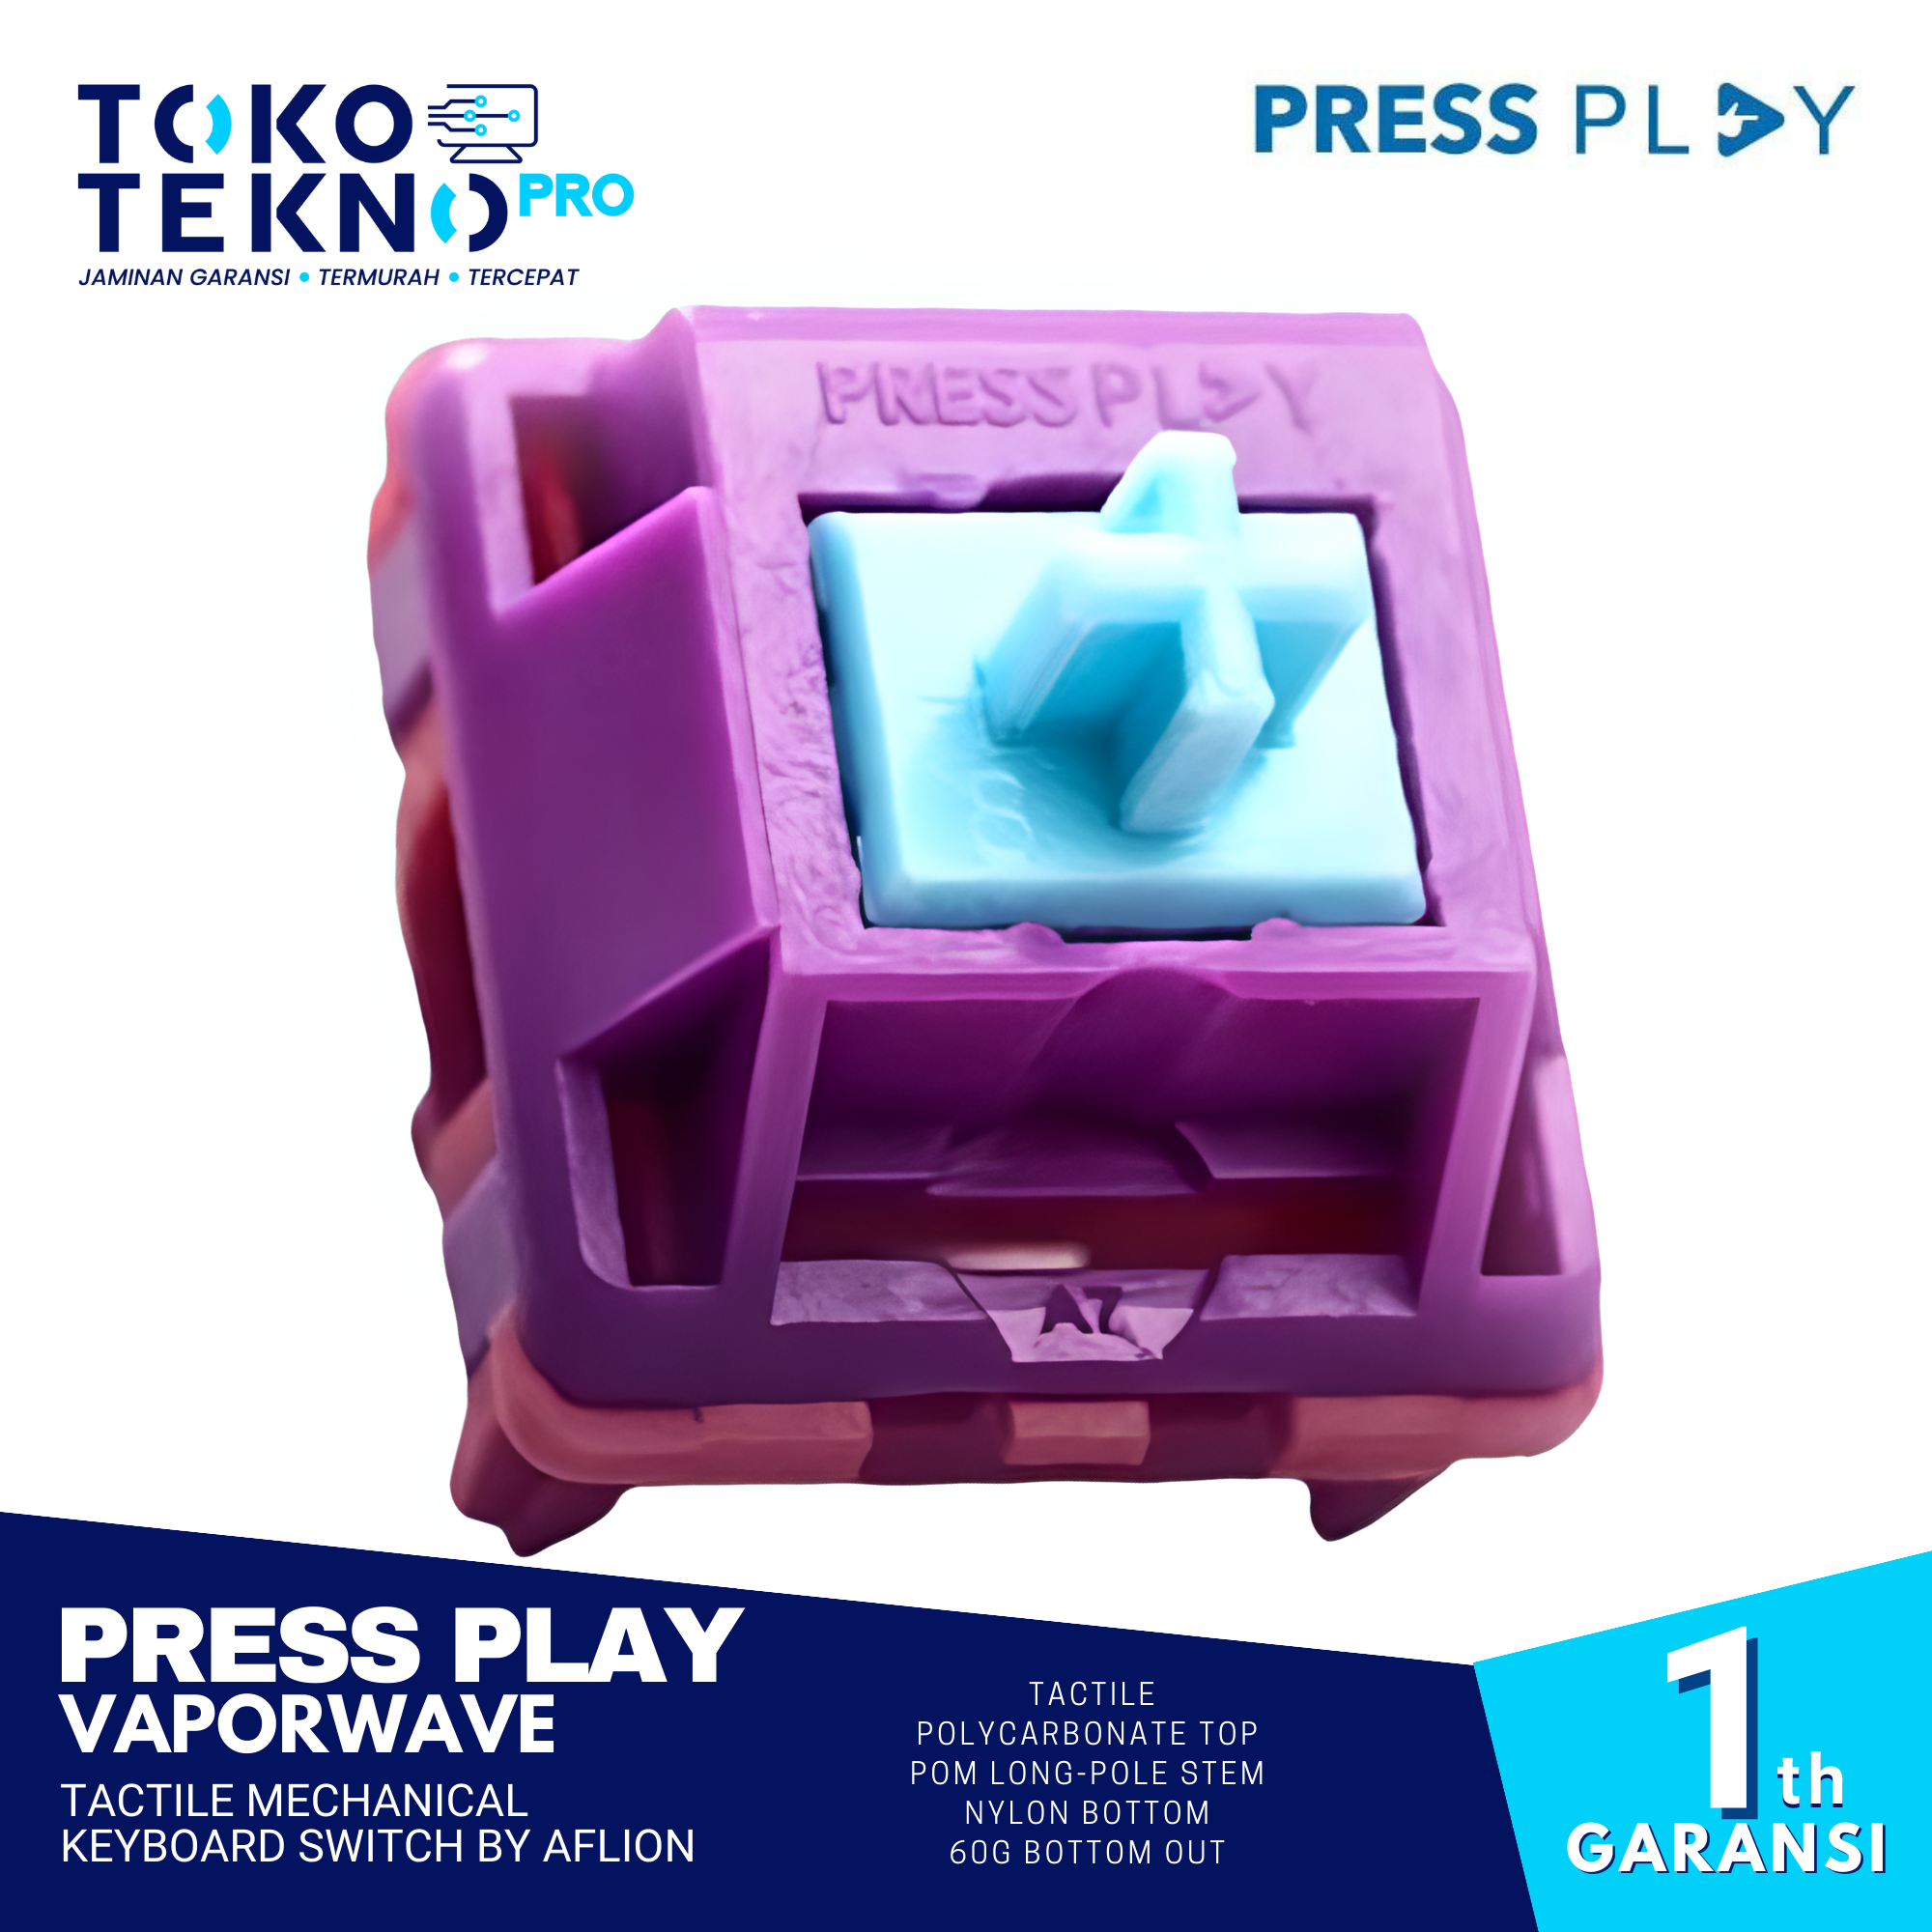 Press Play Vaporwave Tactile Mechanical Keyboard Switch by Aflion